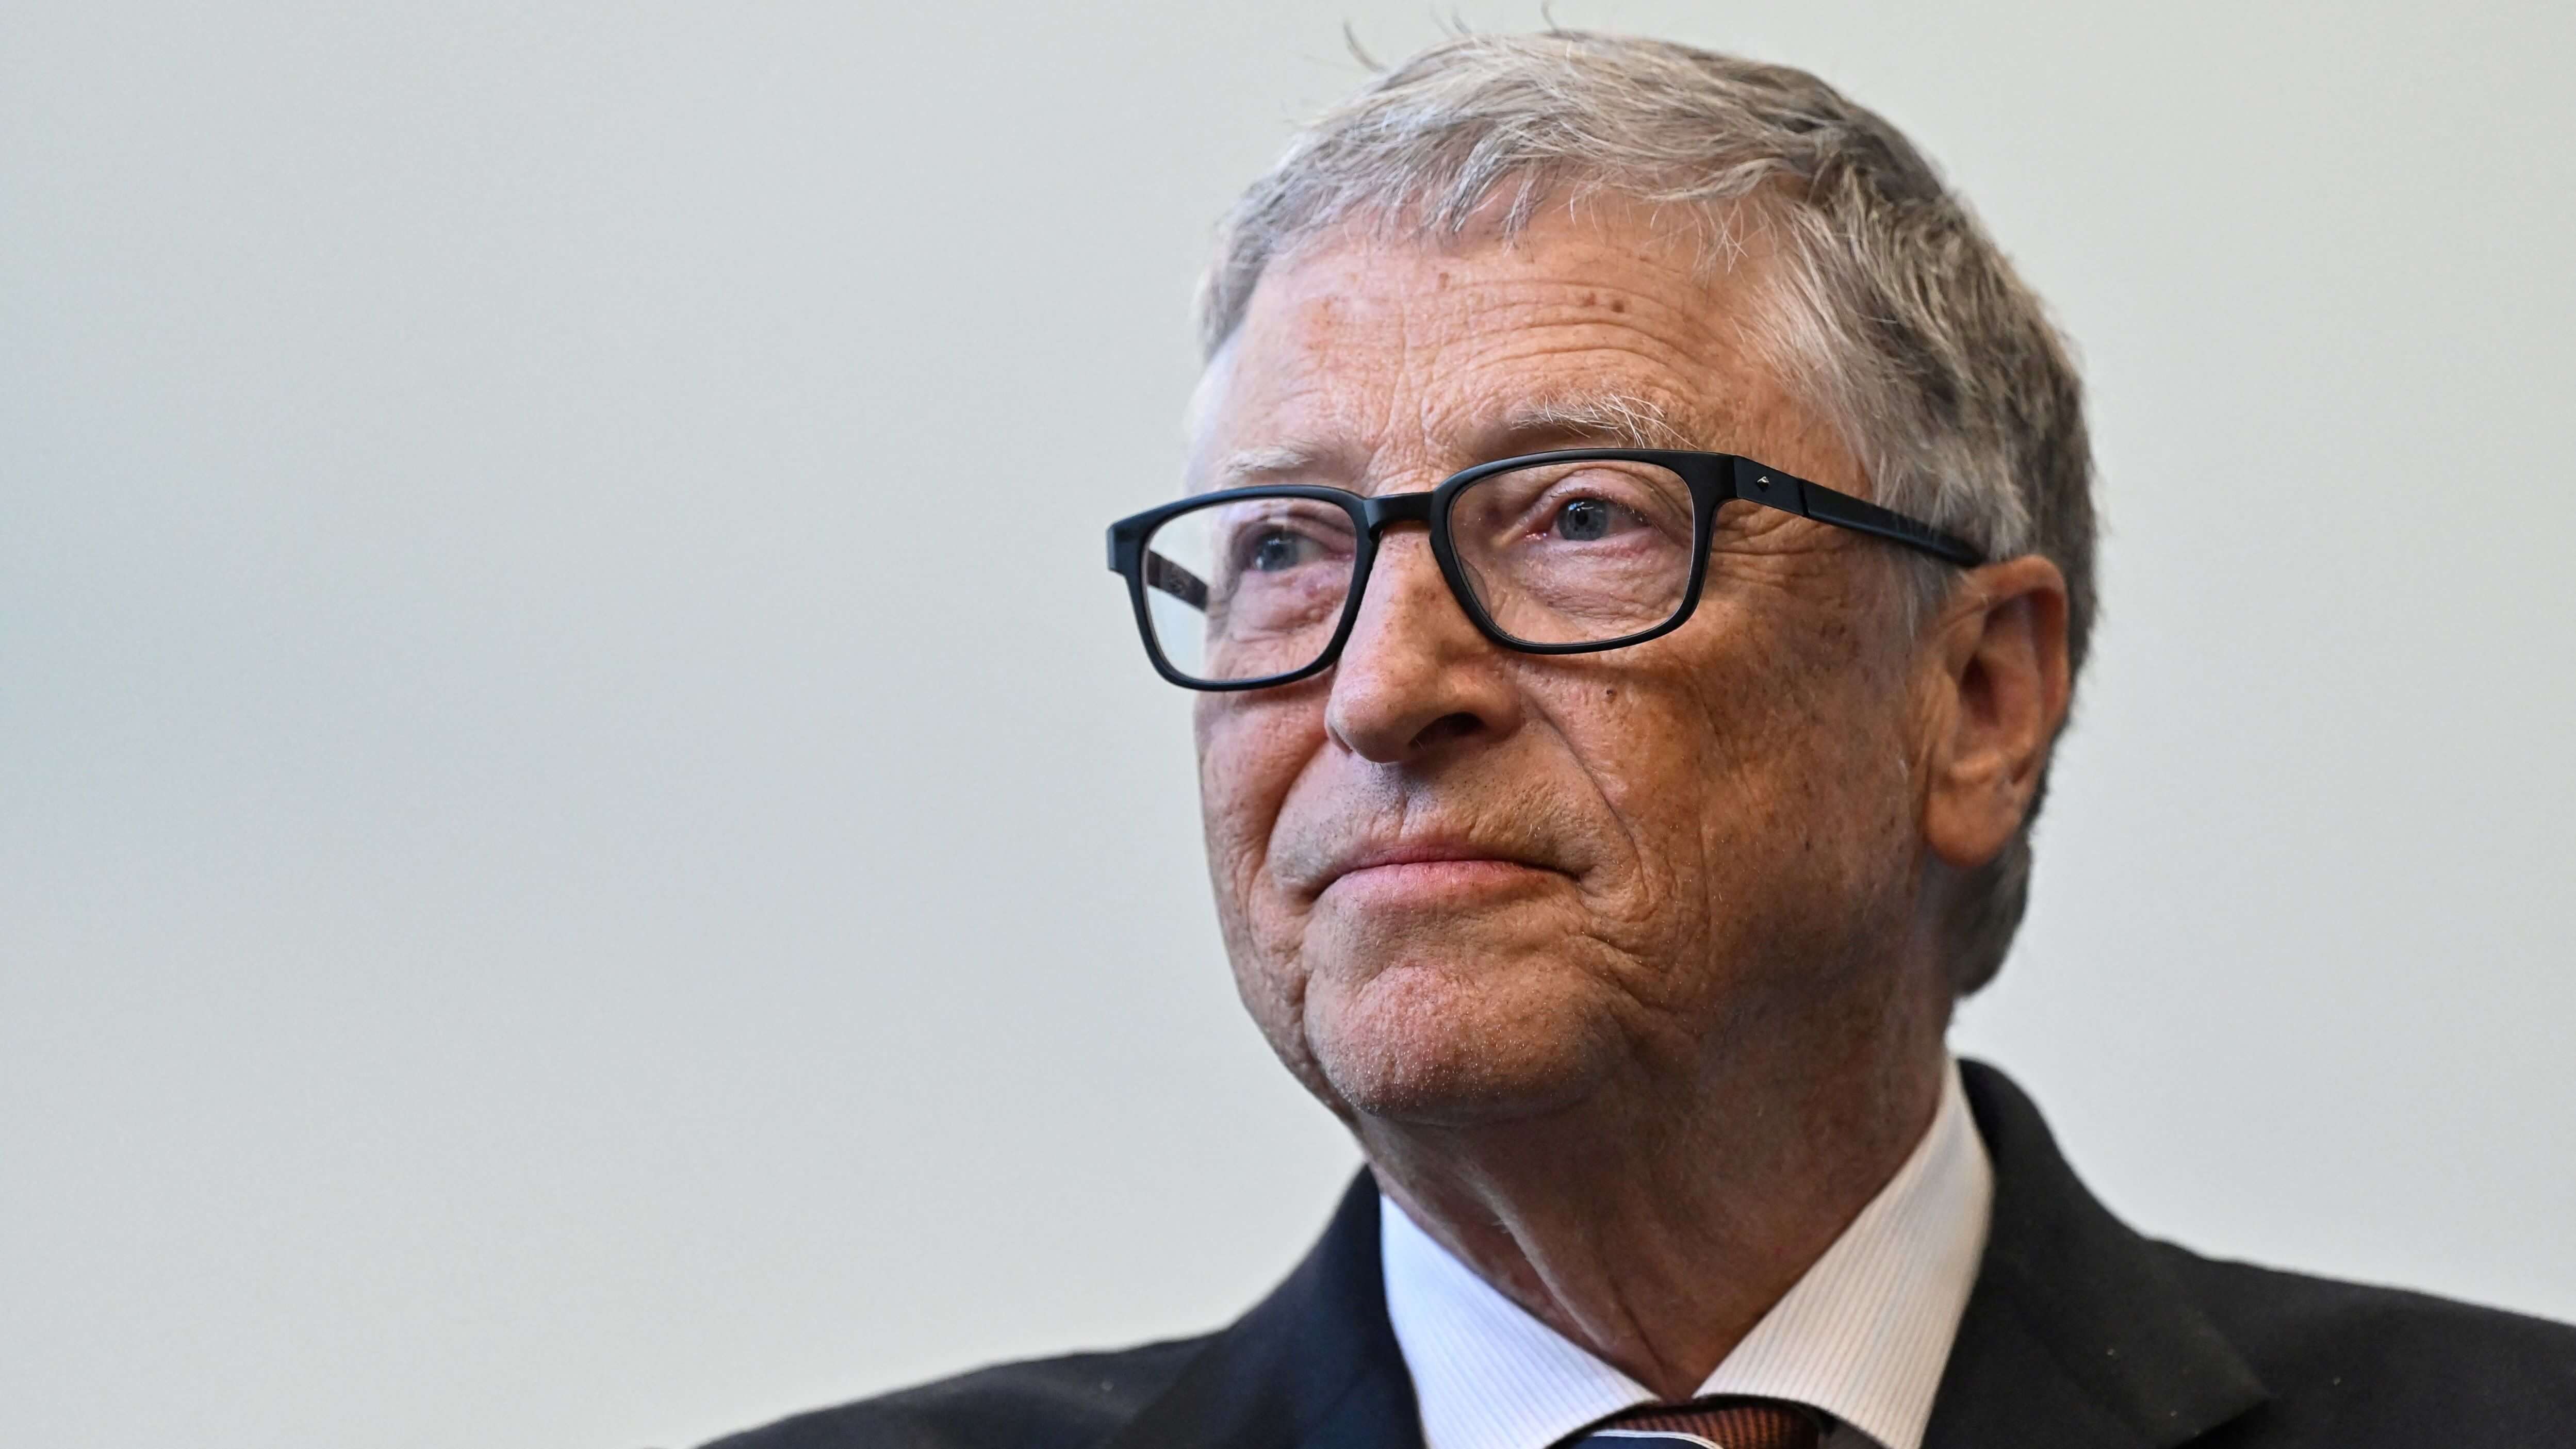 Bill Gates Says Calls To Pause AI Won't 'Solve Challenges'